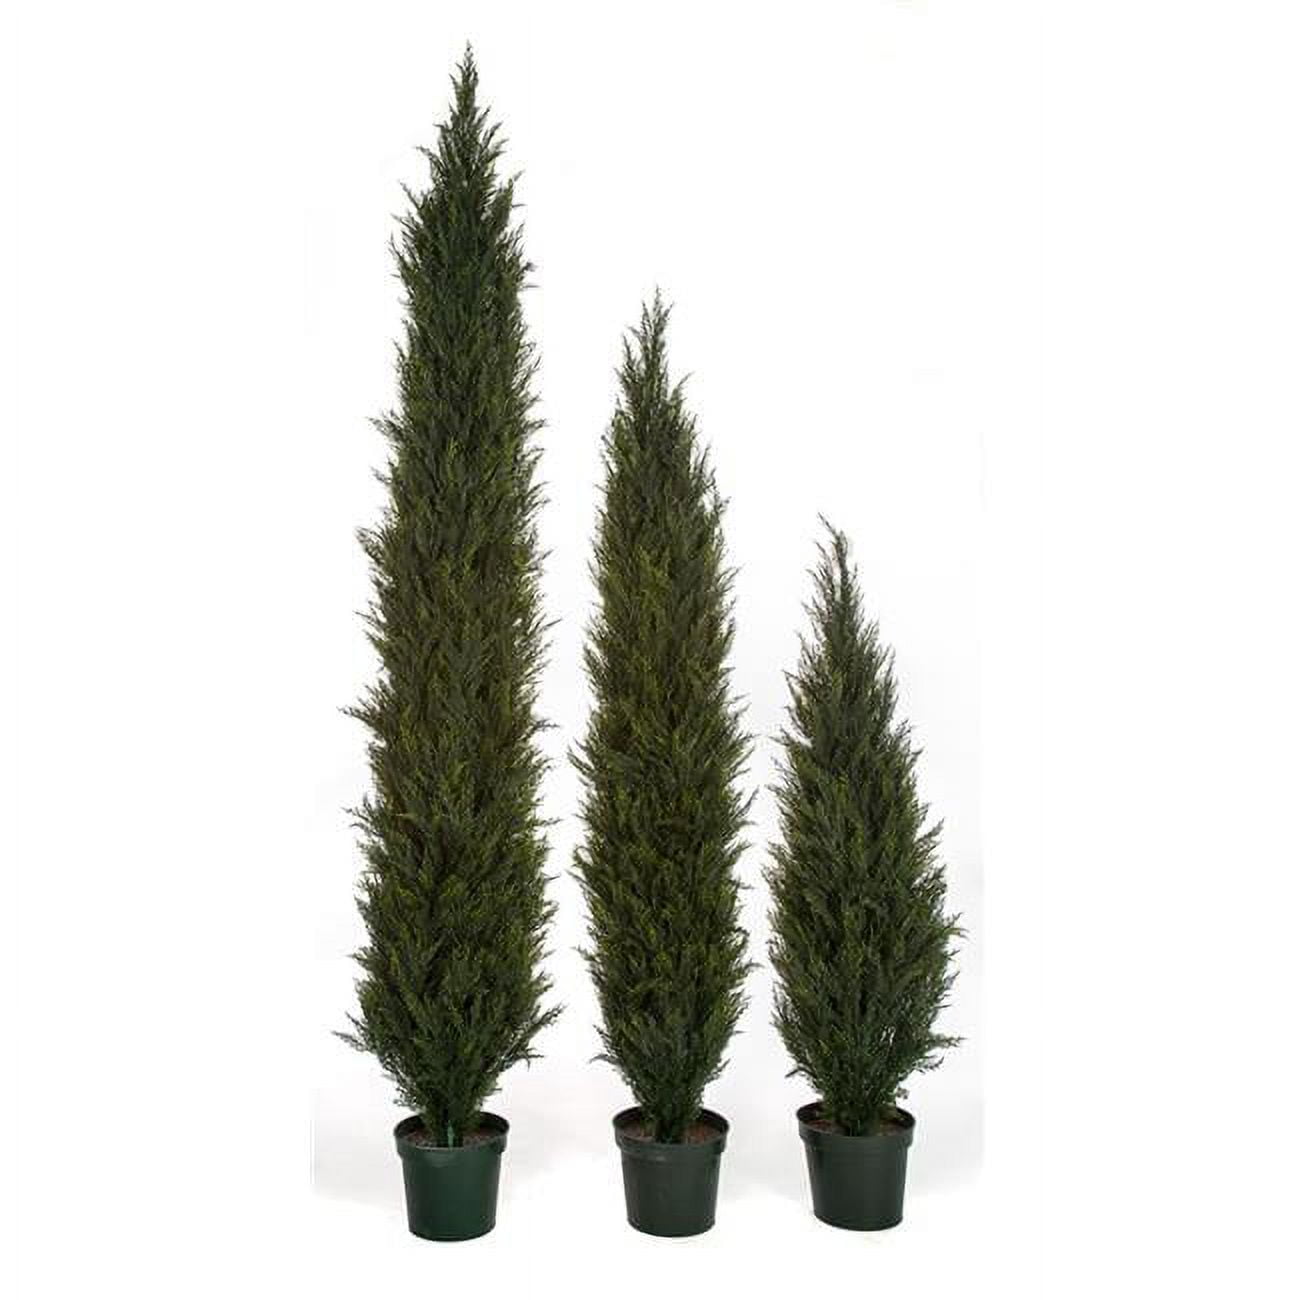 Picture of Autograph Foliages AUV-150006 6 ft. Outdoor UV Rated Cypress Tree, TT Green